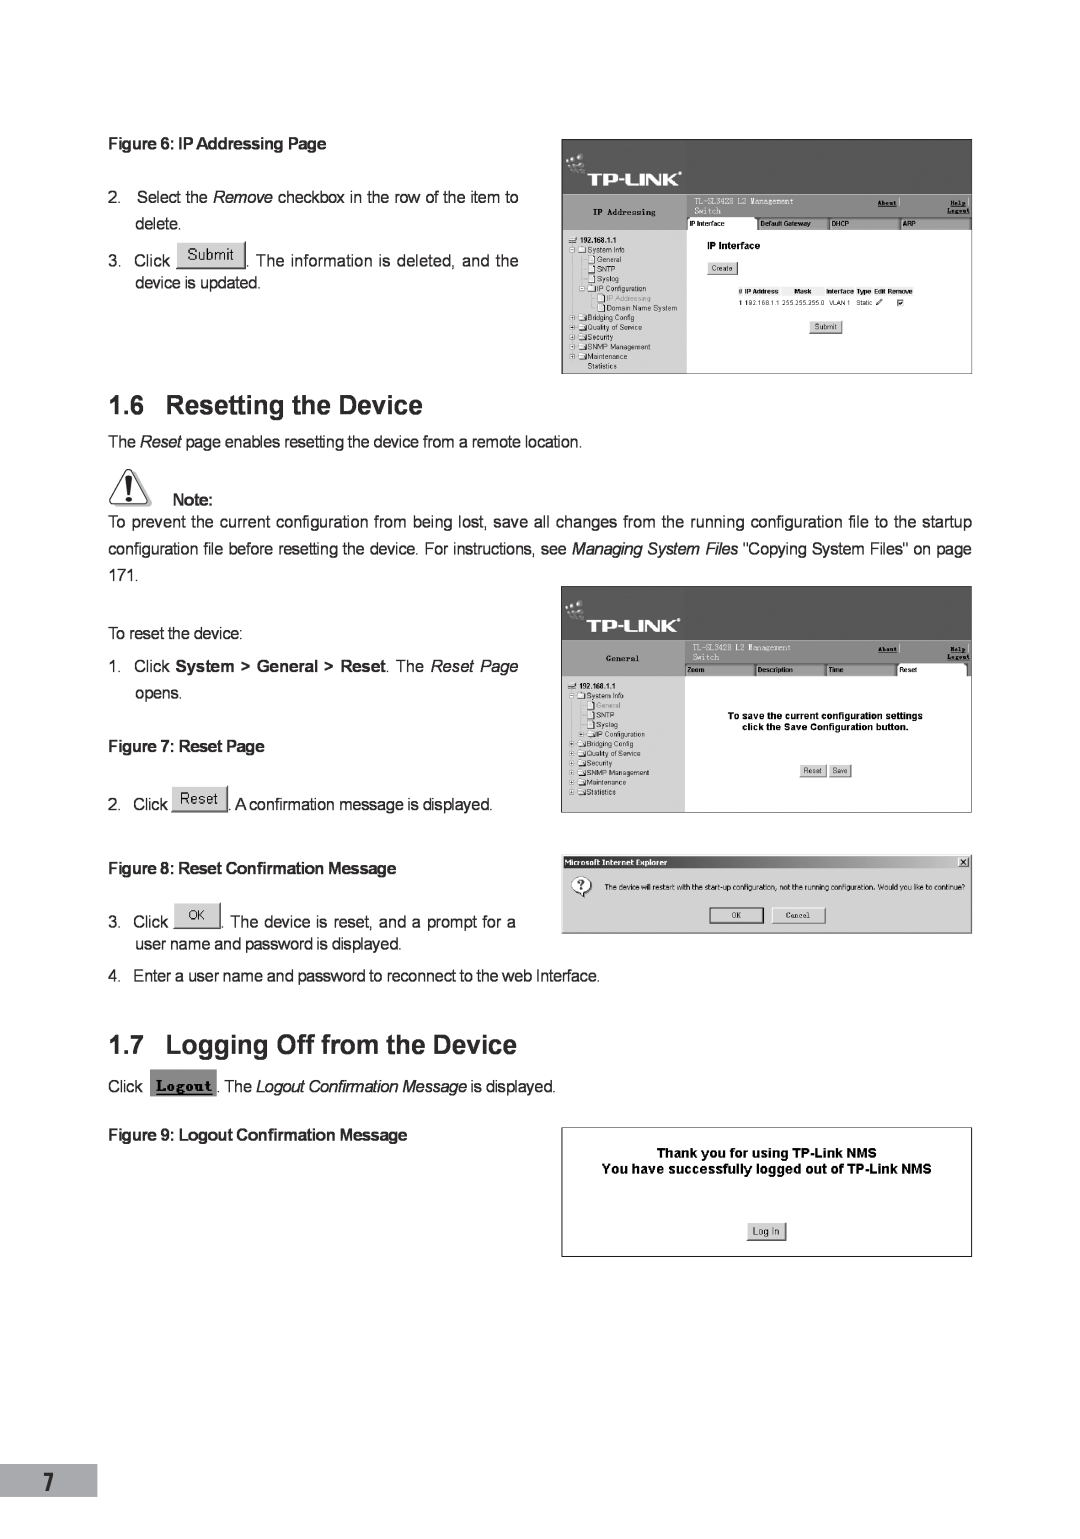 TP-Link TL-SG3109, TL-SL3452, TL-SL3428 Resetting the Device, Logging Off from the Device, IP Addressing Page, Reset Page 